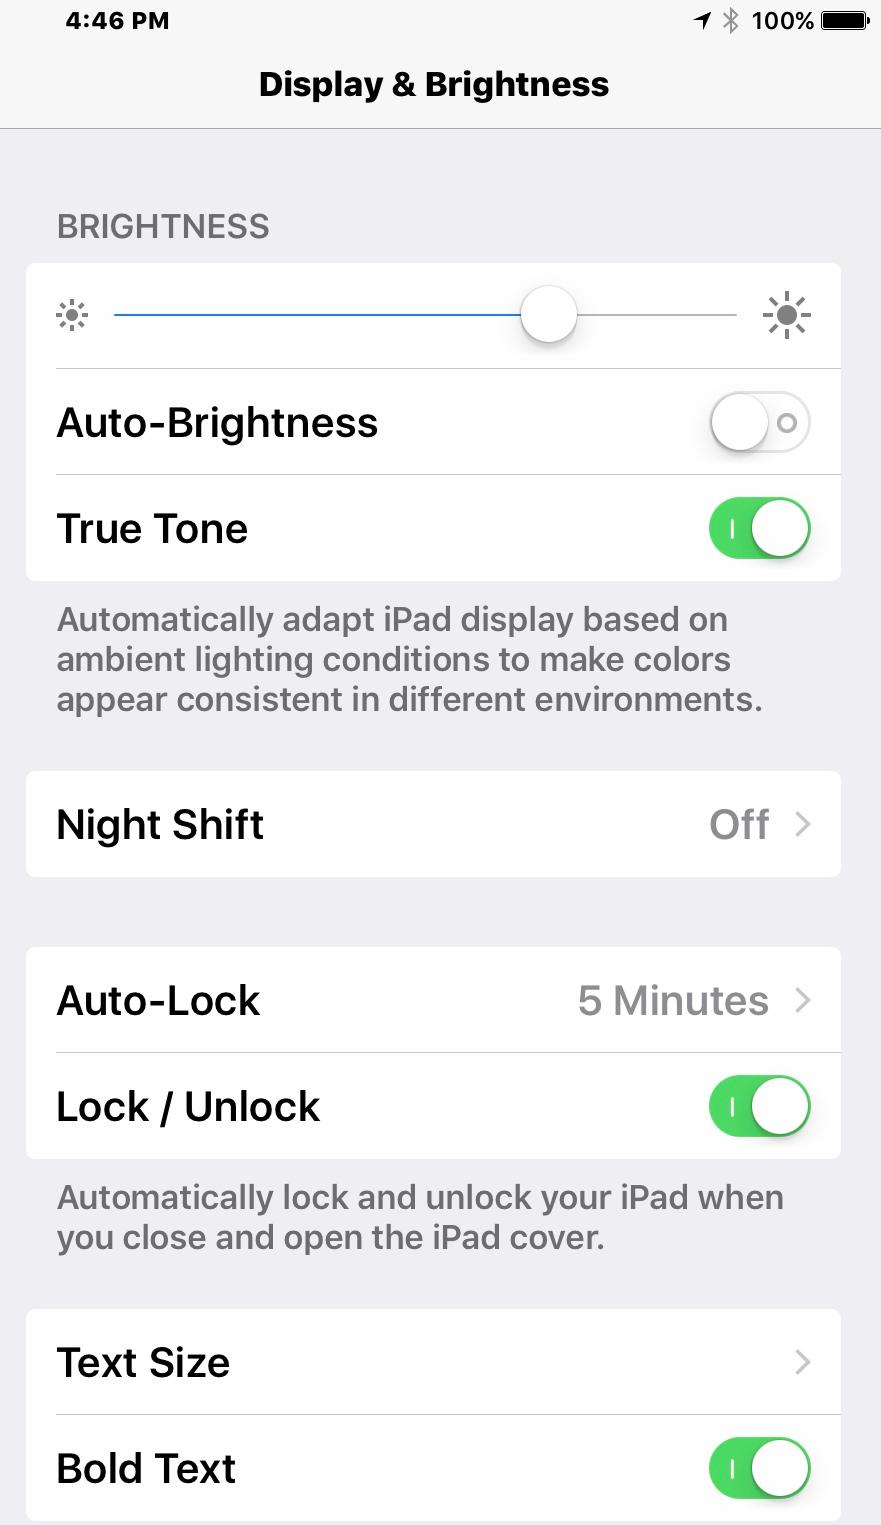 Display and Brightness Manage Brightness manually or automatically Schedule & manage Night Shift - setting warmer color Determine length of time device will remain unlocked Change Text Size and